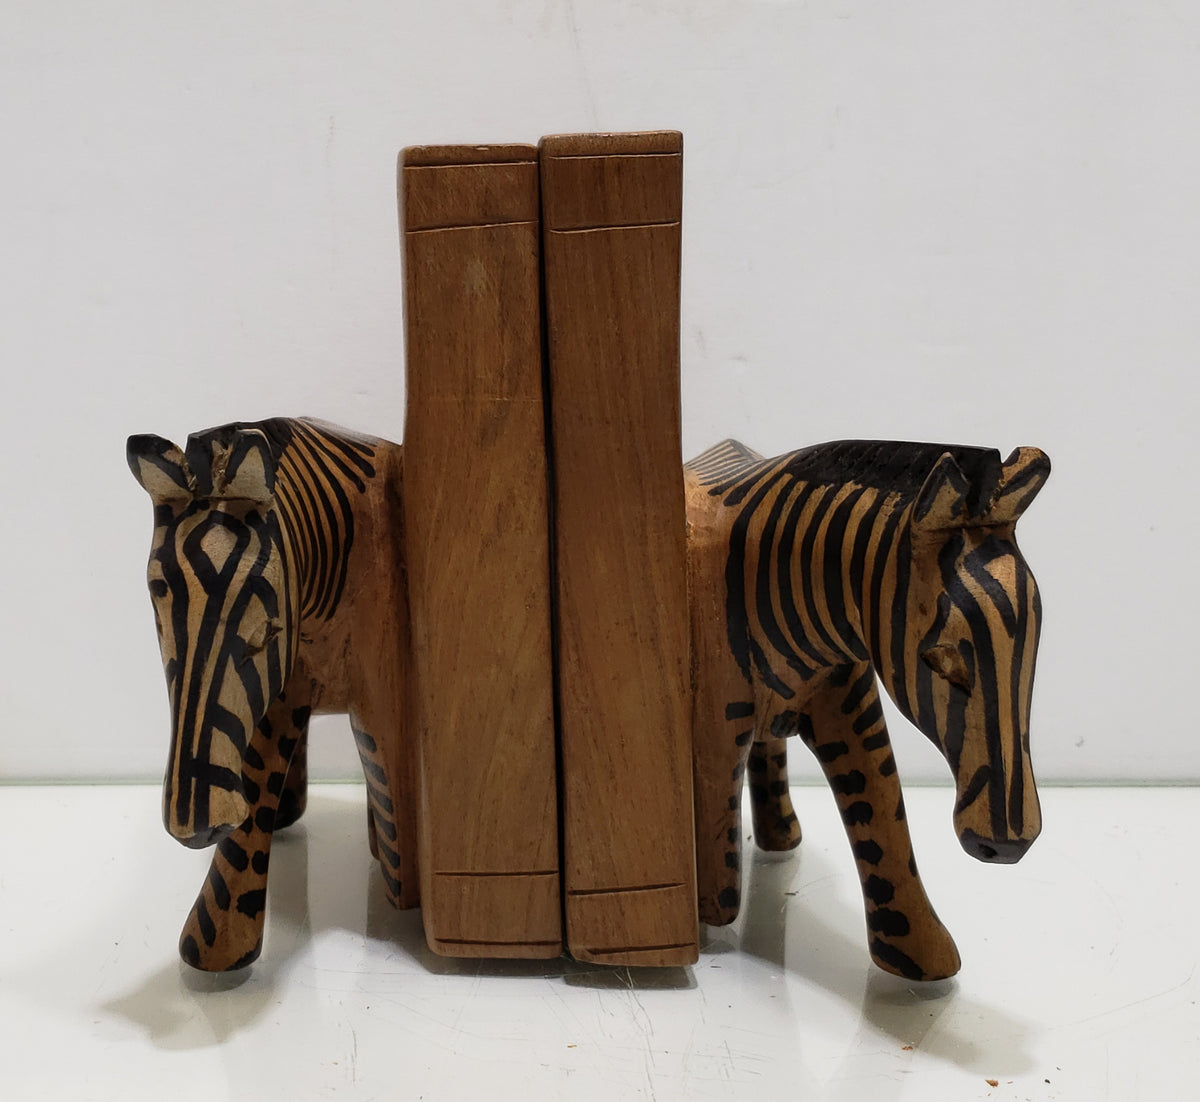 Carved Wooden Animals from Kenya  Carved wooden animals, Wooden